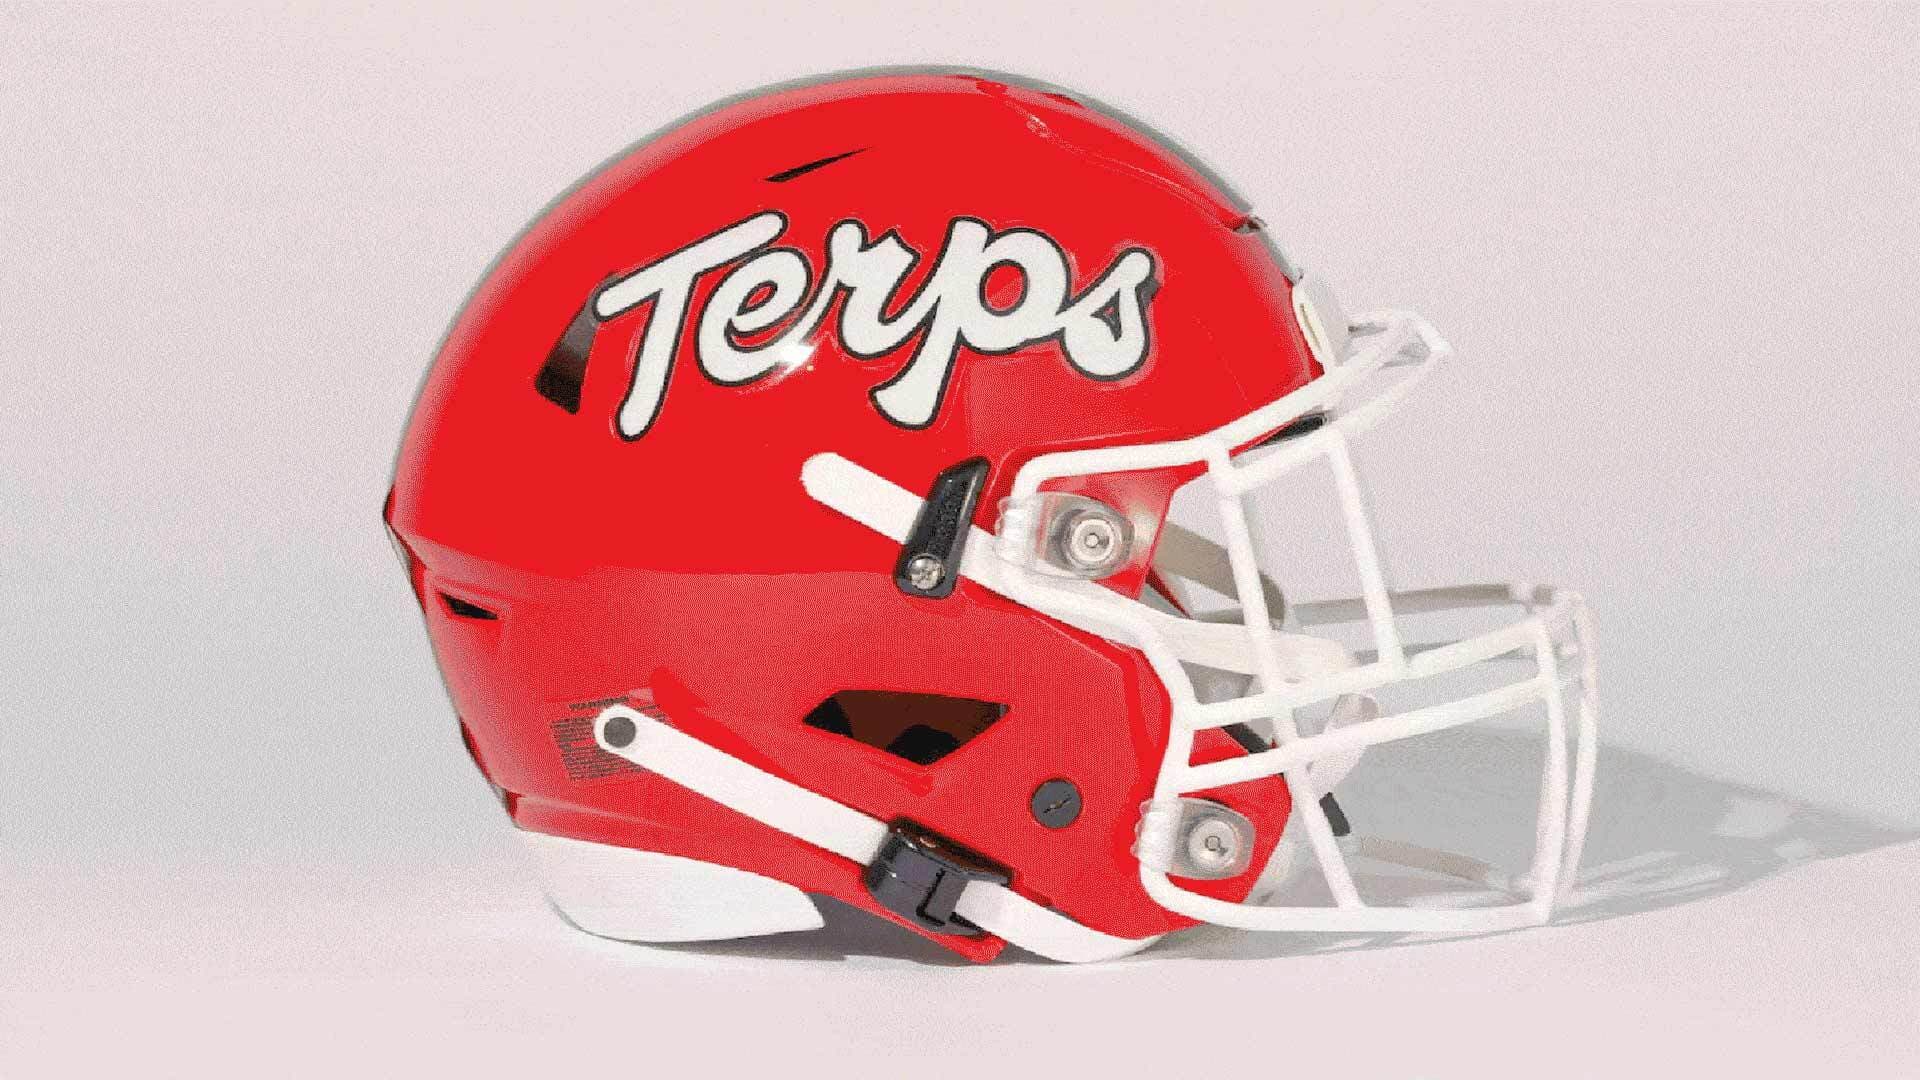 red football helmet with white script Terps on side